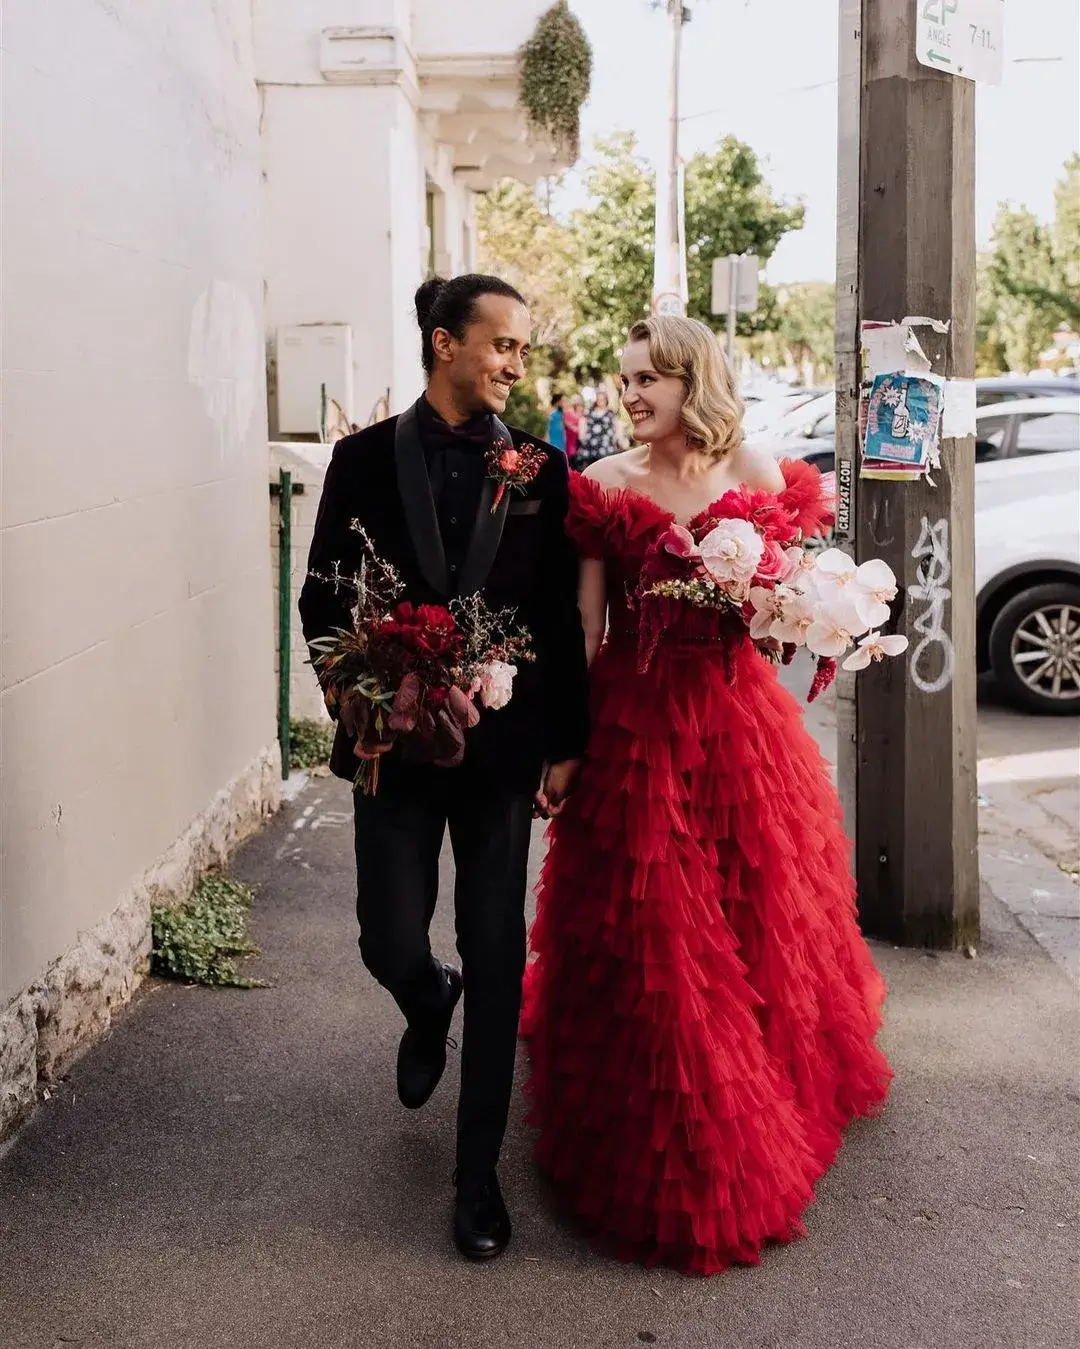 bride and groom walking down the street - bride in red dress with pink bouquet